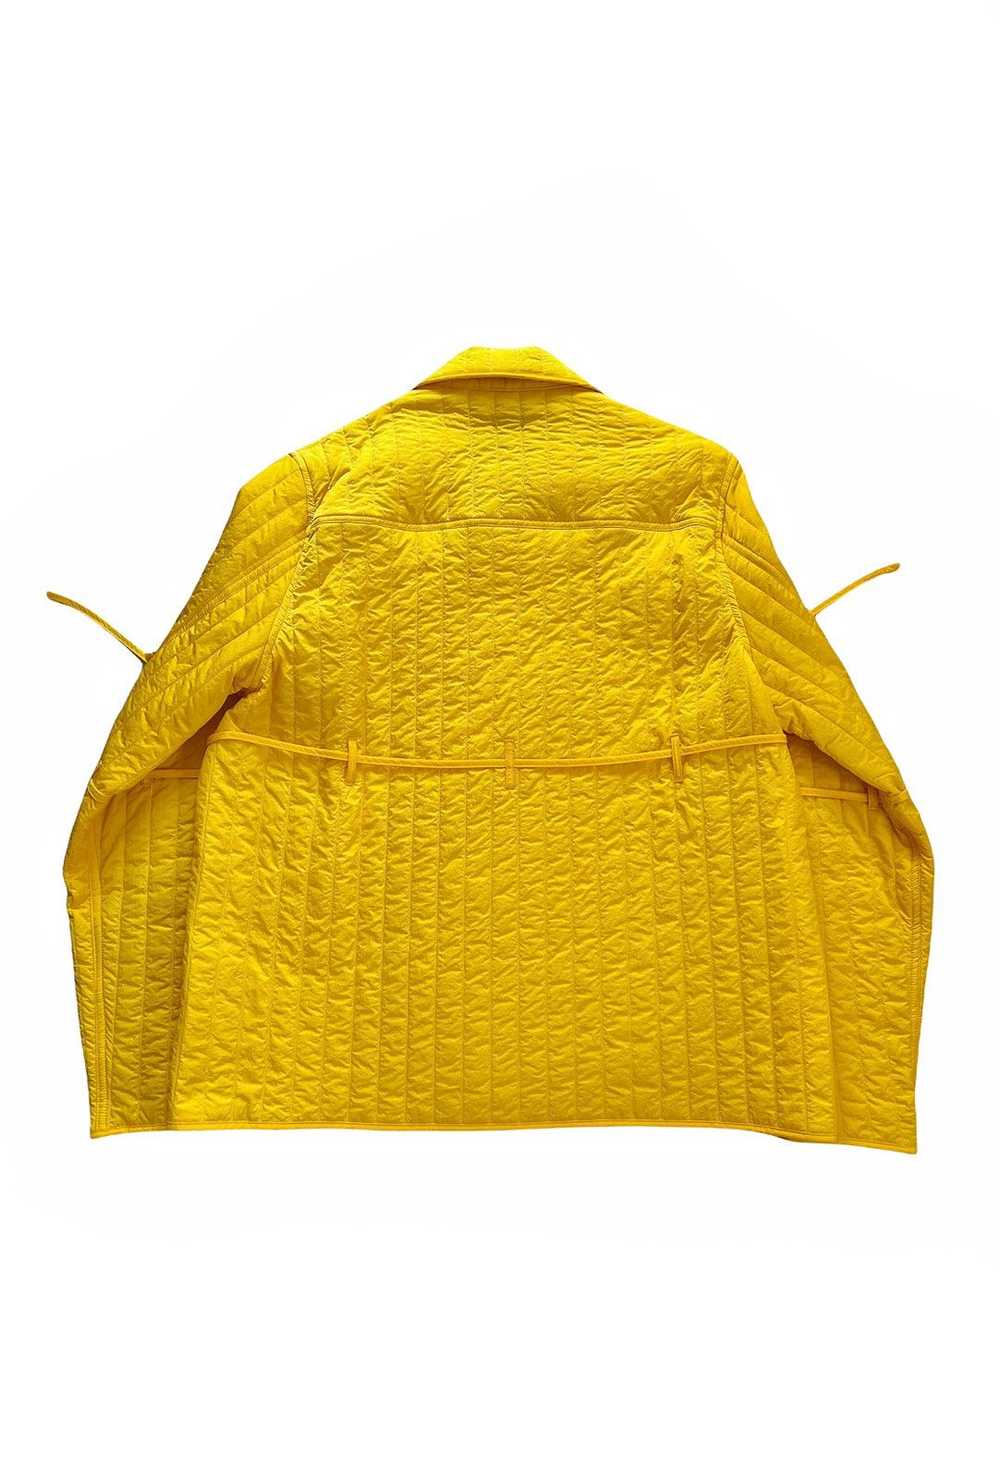 Craig Green SS2016 Yellow Quilted Work Jacket - image 2